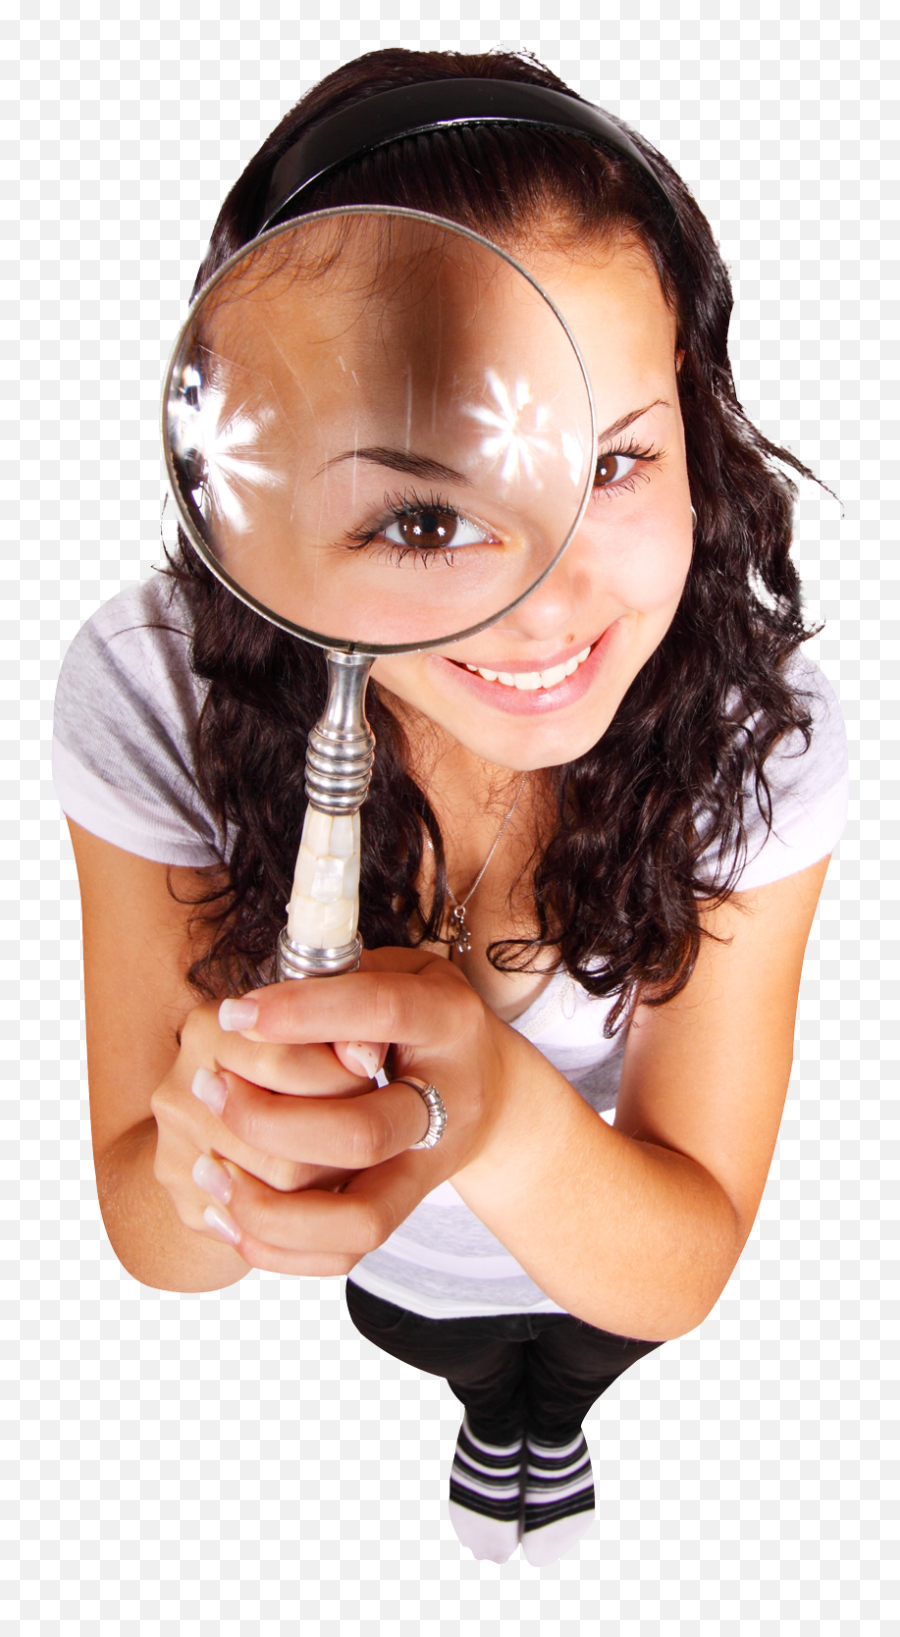 Girl With Magnifying Glass Png Image - Pngpix Person With Magnifying Glass Transparent Background,Magnify Glass Png